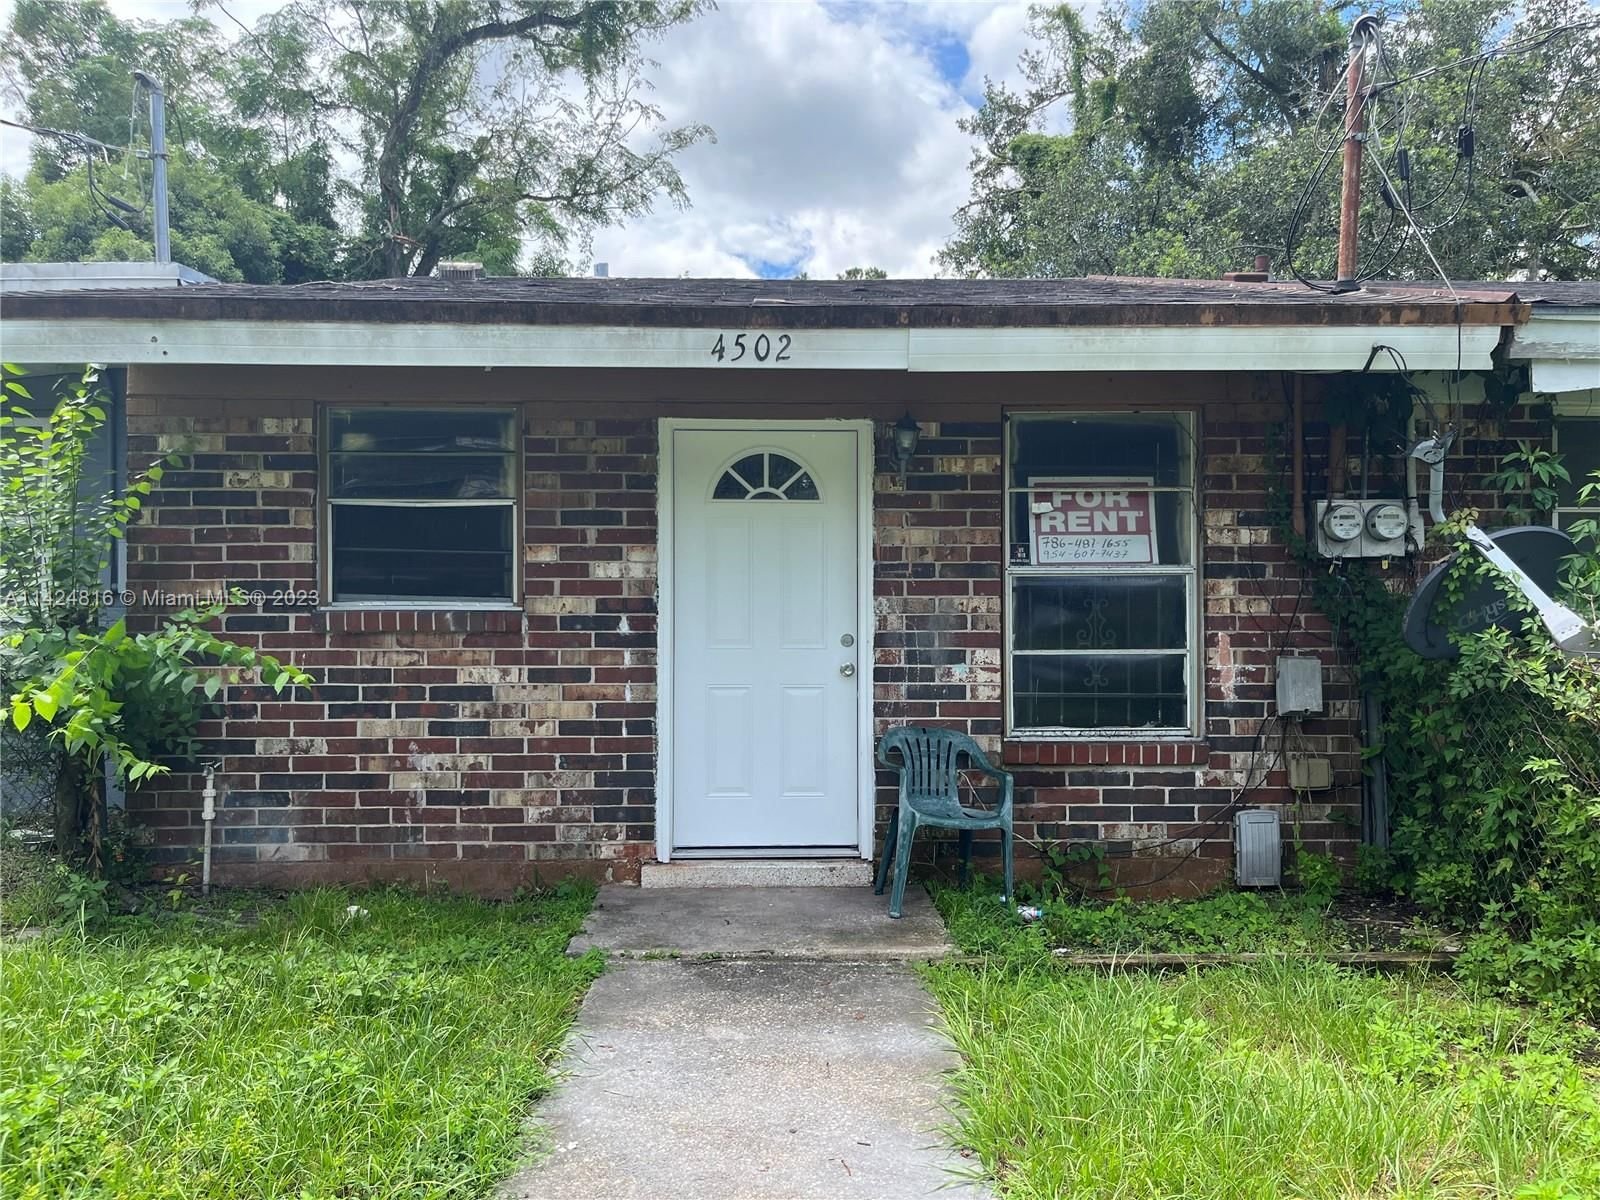 Real estate property located at 4502 Friden Dr Jacksonville, Duval County, Jacksonville, FL